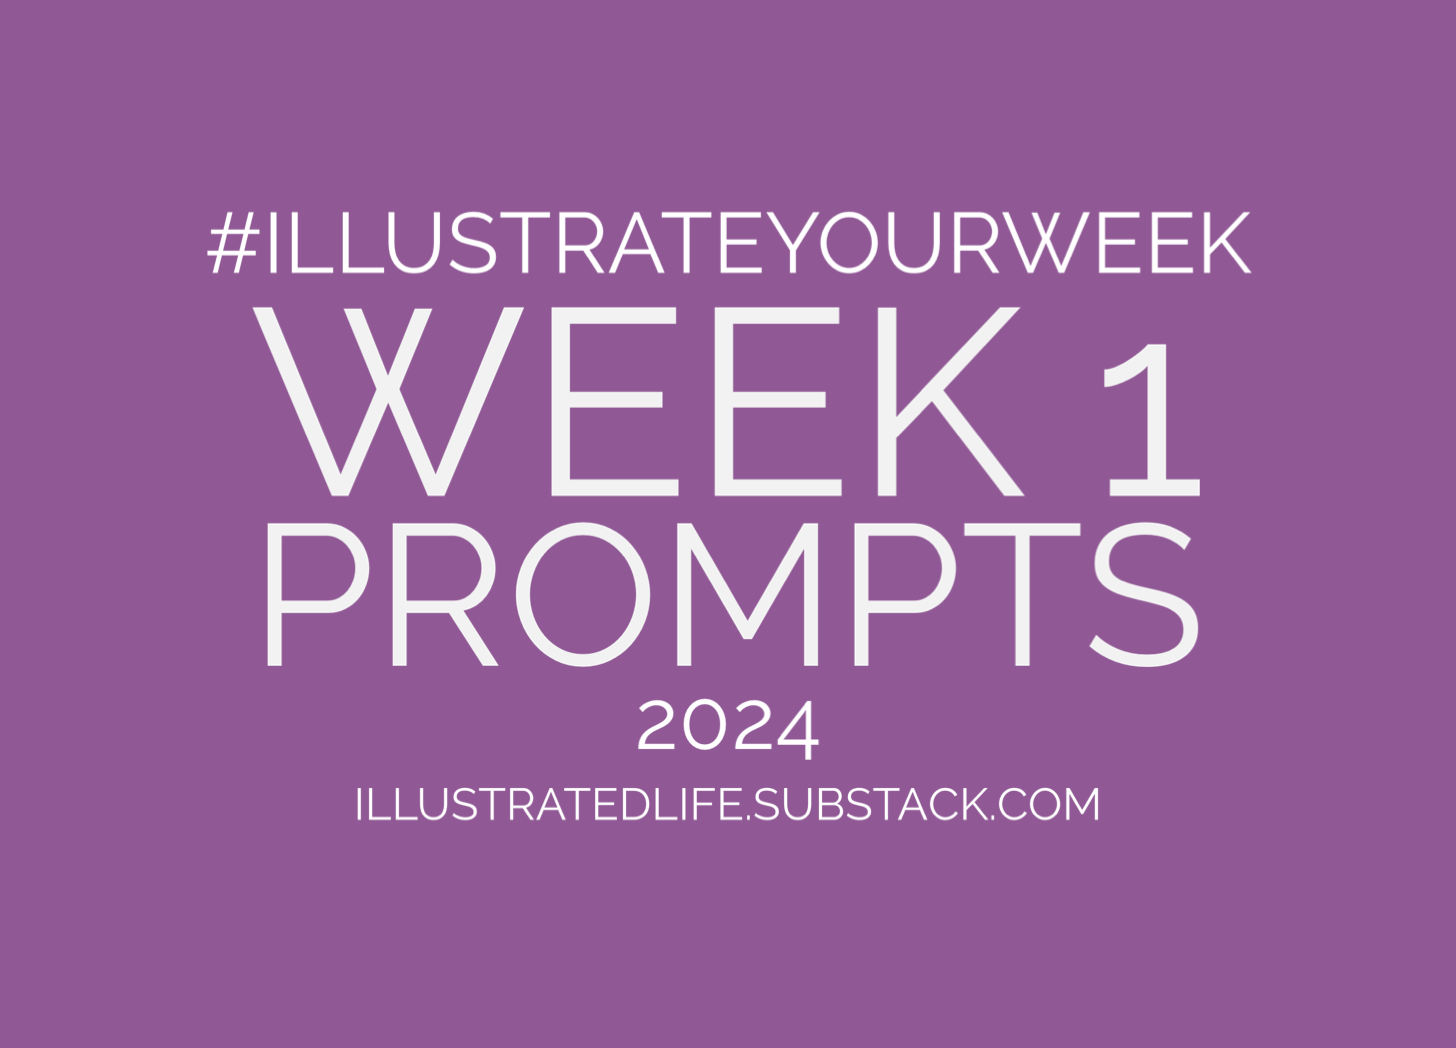 Week 1 Prompts for Illustrate Your Week 2024